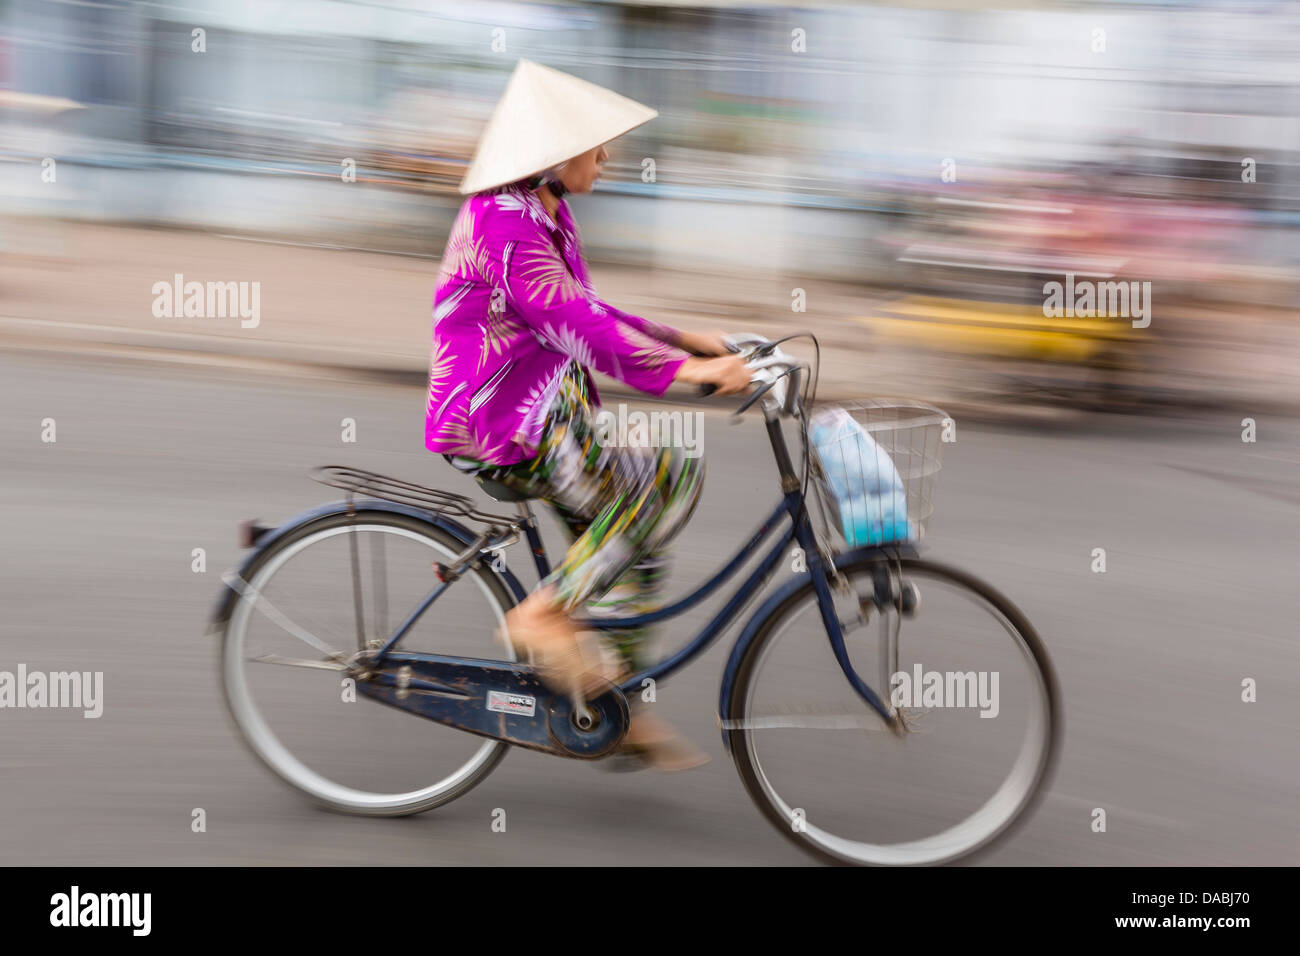 Woman on bicycle, slow shutter speed, Chau Doc, Mekong River Delta, Vietnam, Indochina, Southeast Asia, Asia Stock Photo